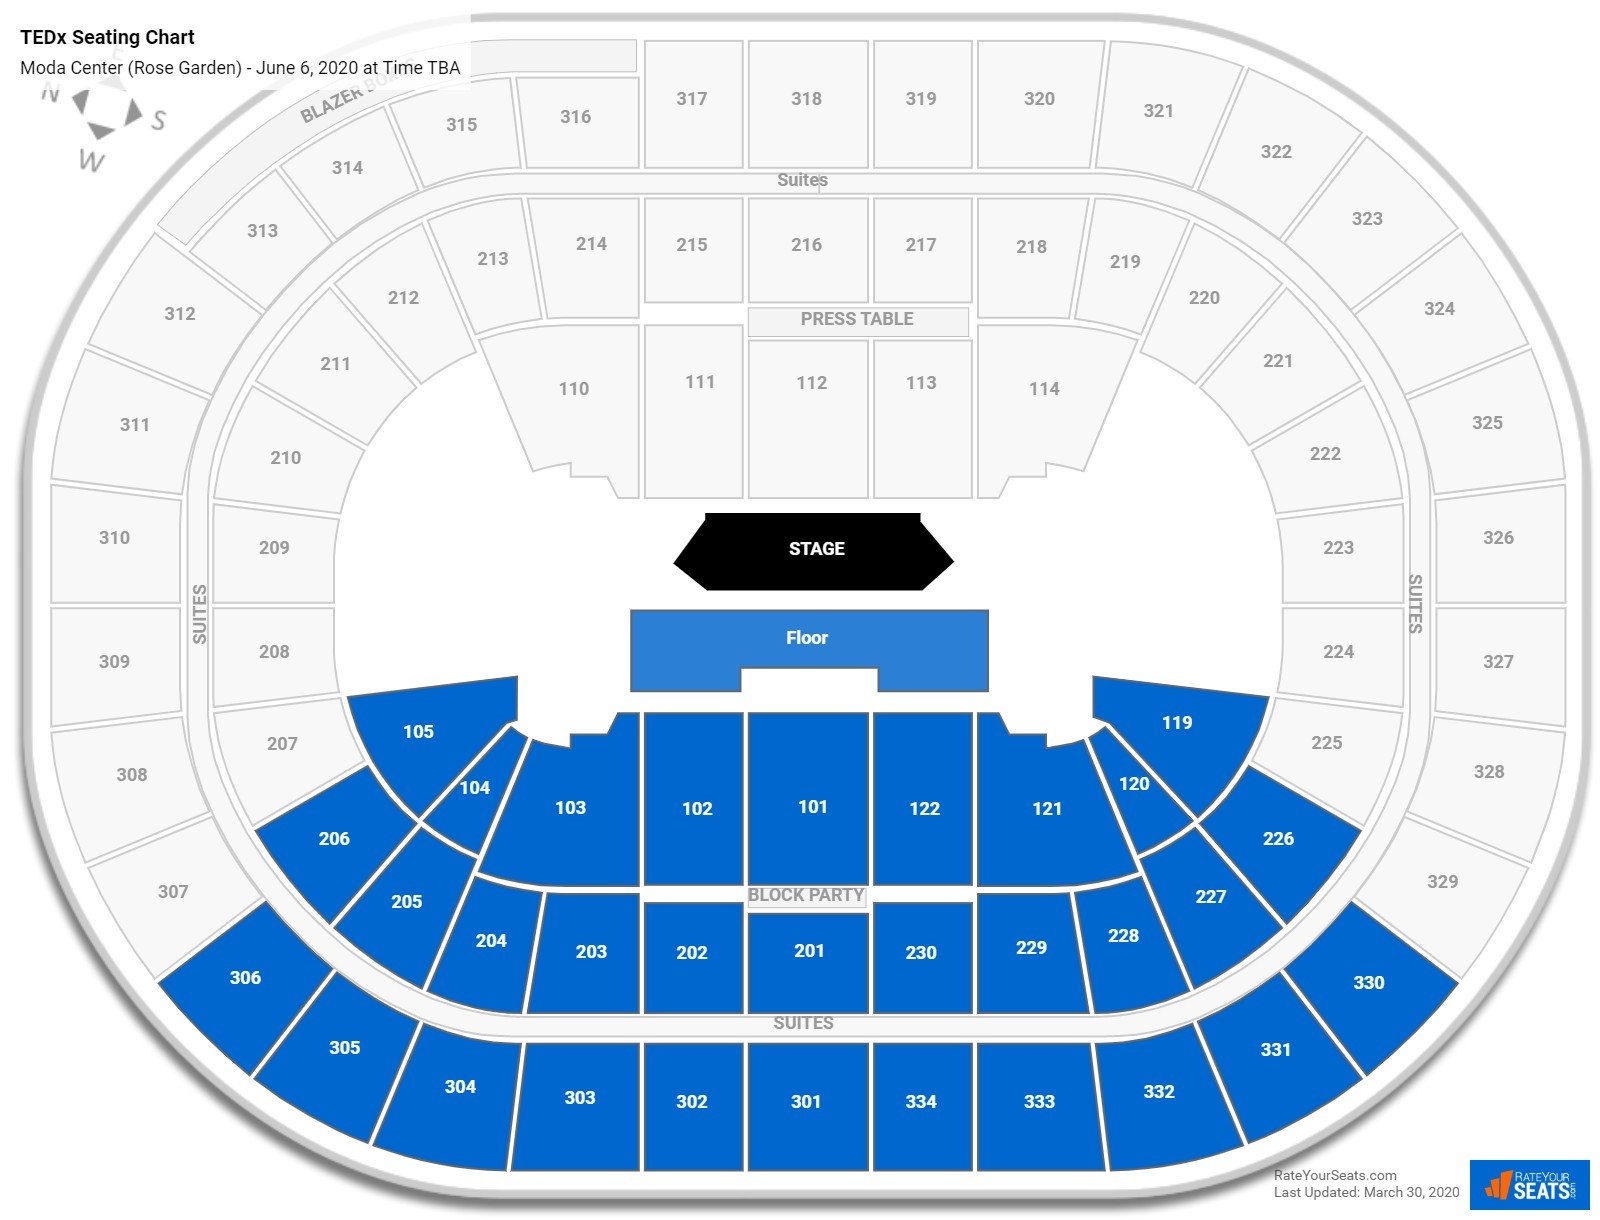 Moda Center Seating Charts for Concerts - RateYourSeats.com